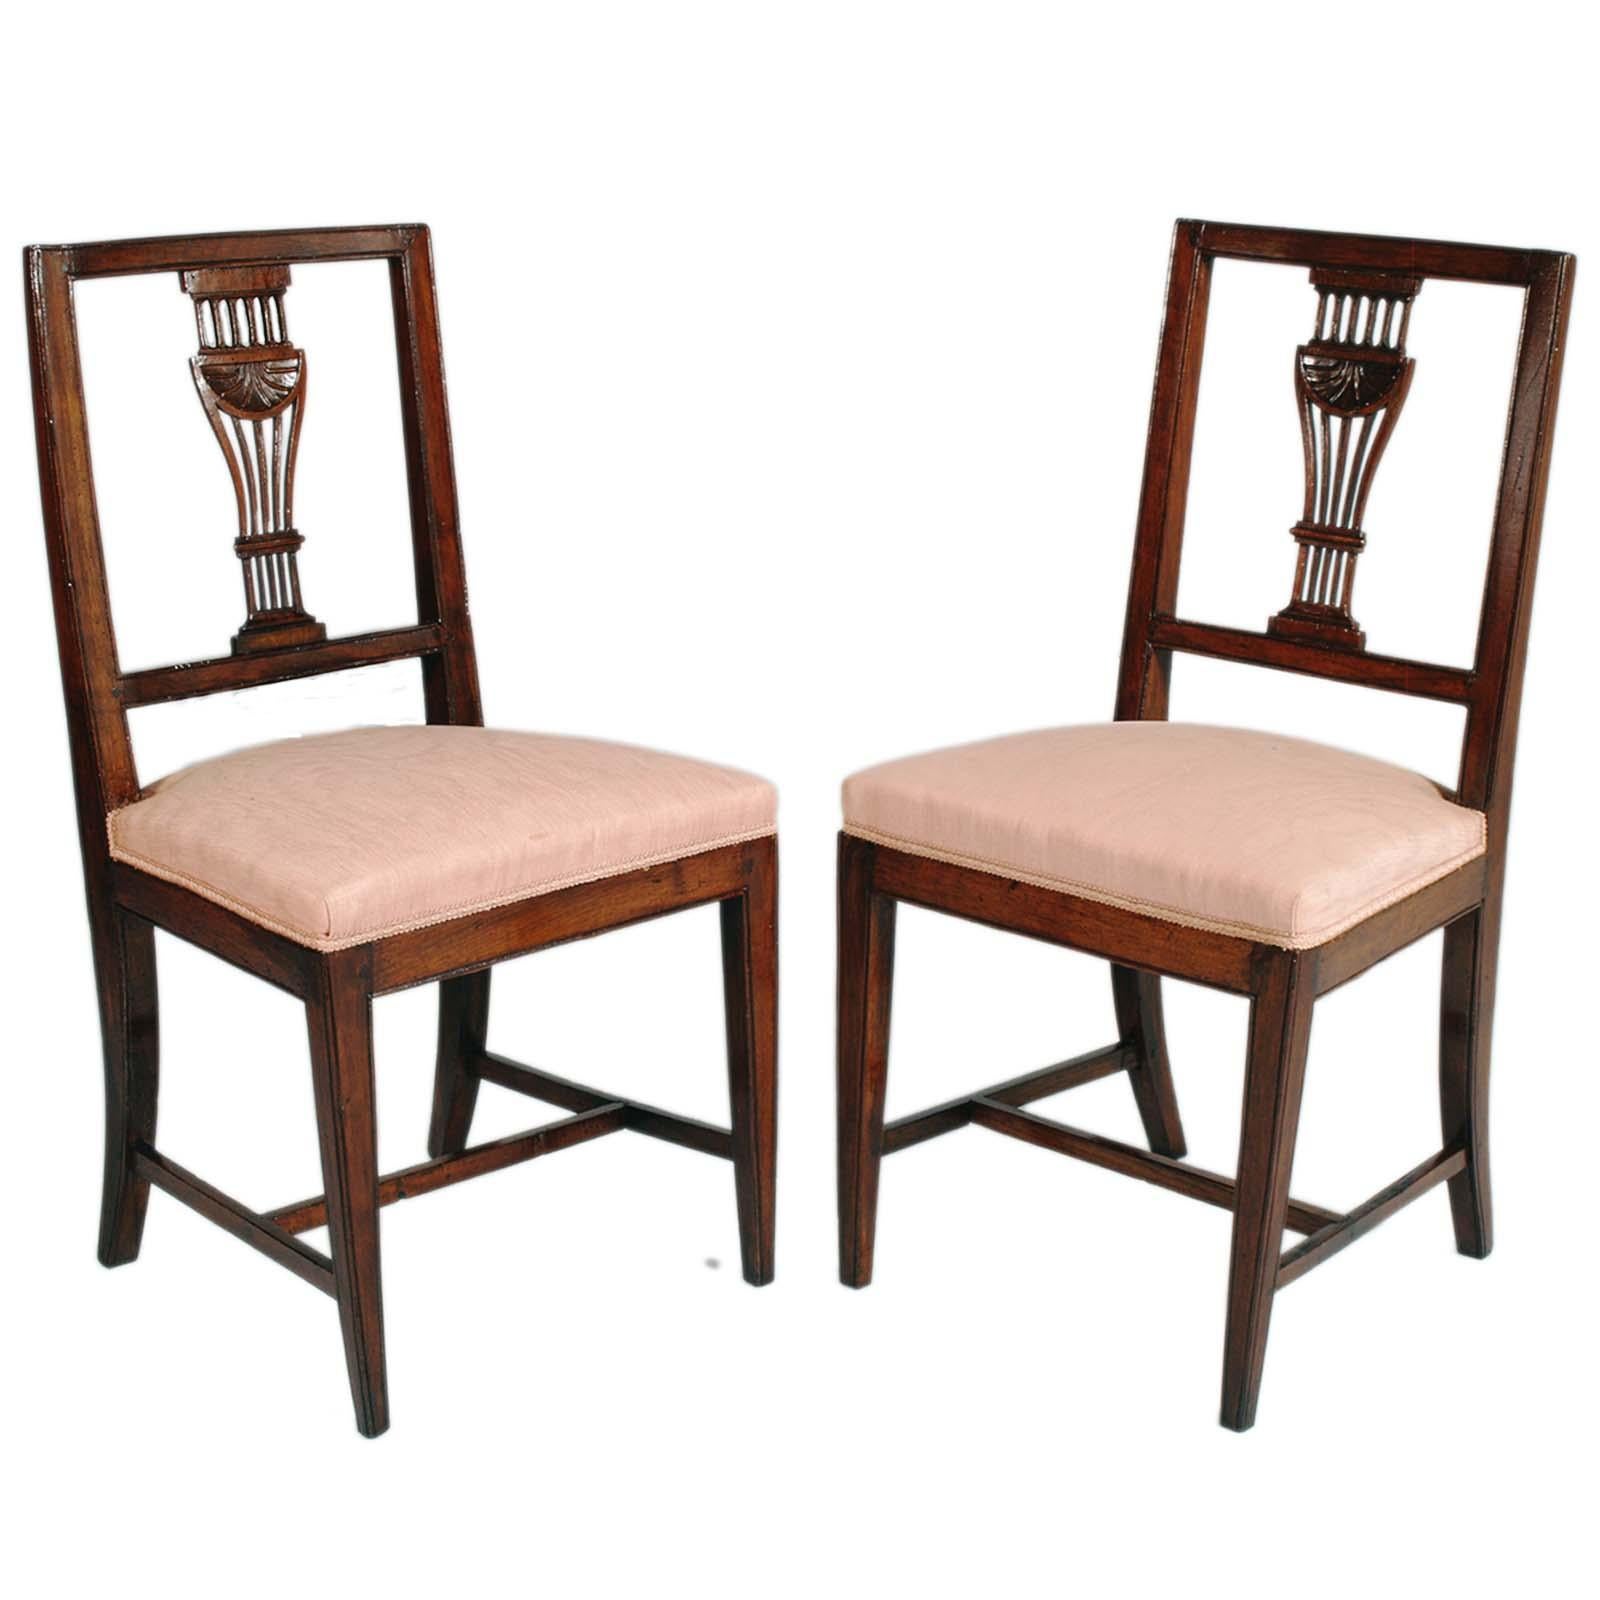 Set of 6 Asolane Biedermeier chairs from the second half of the 19th century in walnut with lyre-shaped backrest, hand-carved. Fixing with wooden nails; spring seat covered in antique pink fabric in good condition. 
Design of the chairs attributable